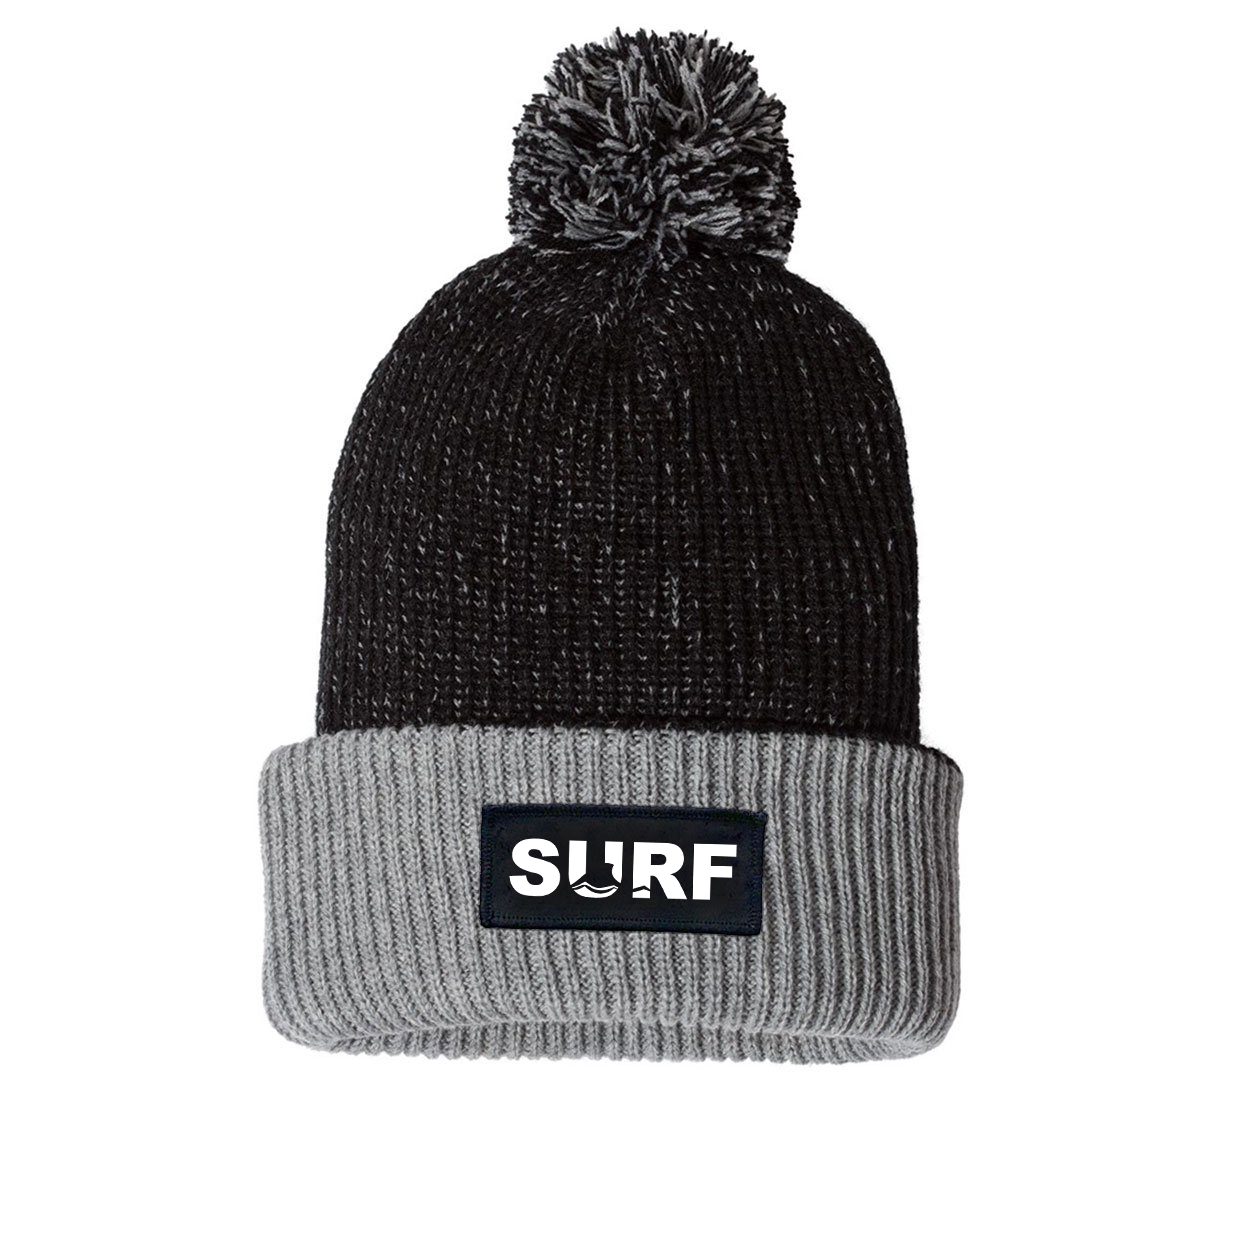 Surf Wave Logo Night Out Woven Patch Roll Up Pom Knit Beanie Black/Gray (White Logo)